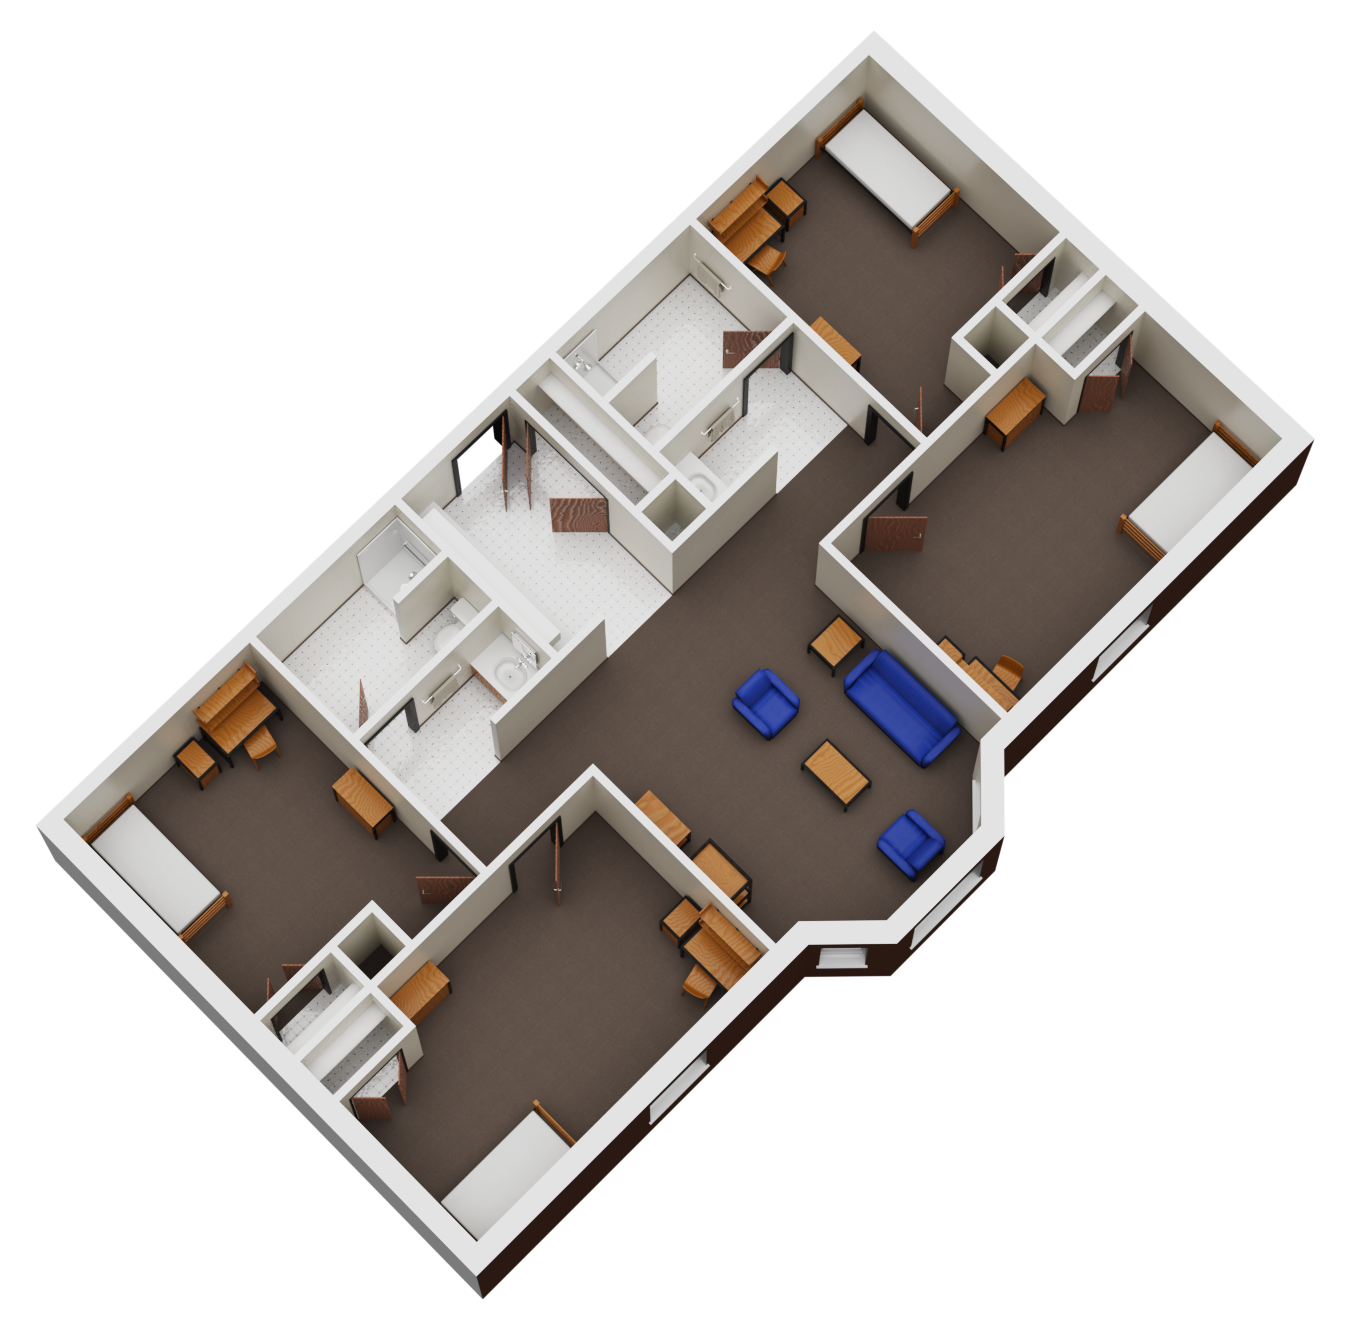 Floorplan for 4 single beds and 2 baths room.